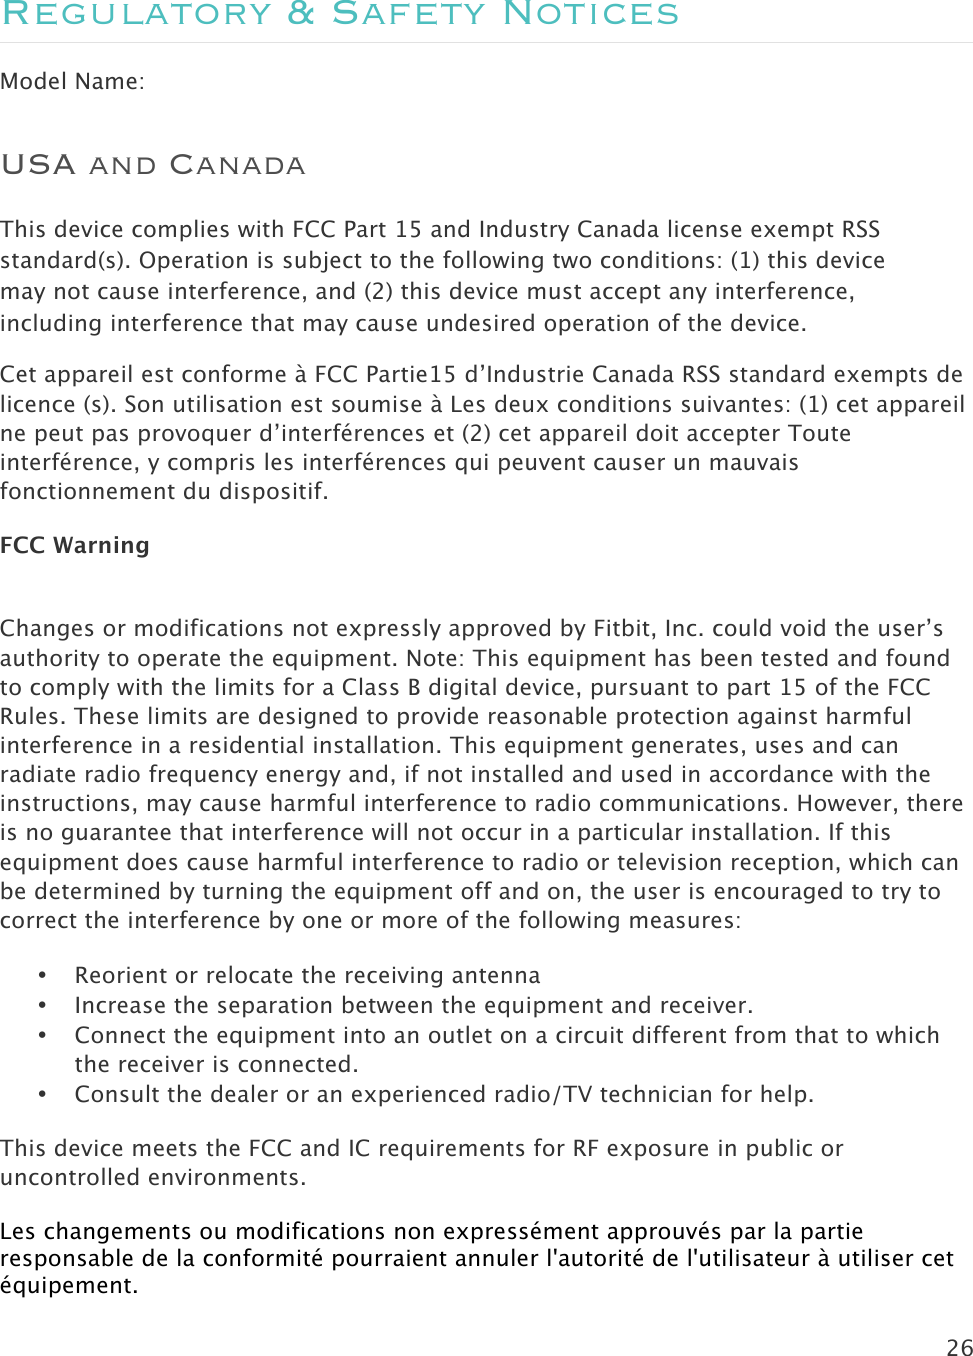 26  Regulatory &amp; Safety Notices Model Name: USA and Canada This device complies with FCC Part 15 and Industry Canada license exempt RSS standard(s). Operation is subject to the following two conditions: (1) this device may not cause interference, and (2) this device must accept any interference, including interference that may cause undesired operation of the device. Cet appareil est conforme à FCC Partie15 d’Industrie Canada RSS standard exempts de licence (s). Son utilisation est soumise à Les deux conditions suivantes: (1) cet appareil ne peut pas provoquer d’interférences et (2) cet appareil doit accepter Toute interférence, y compris les interférences qui peuvent causer un mauvais fonctionnement du dispositif. FCC Warning  Changes or modifications not expressly approved by Fitbit, Inc. could void the user’s authority to operate the equipment. Note: This equipment has been tested and found to comply with the limits for a Class B digital device, pursuant to part 15 of the FCC Rules. These limits are designed to provide reasonable protection against harmful interference in a residential installation. This equipment generates, uses and can radiate radio frequency energy and, if not installed and used in accordance with the instructions, may cause harmful interference to radio communications. However, there is no guarantee that interference will not occur in a particular installation. If this equipment does cause harmful interference to radio or television reception, which can be determined by turning the equipment off and on, the user is encouraged to try to correct the interference by one or more of the following measures: • Reorient or relocate the receiving antenna • Increase the separation between the equipment and receiver.  • Connect the equipment into an outlet on a circuit different from that to which the receiver is connected. • Consult the dealer or an experienced radio/TV technician for help. This device meets the FCC and IC requirements for RF exposure in public or uncontrolled environments. Les changements ou modifications non expressément approuvés par la partie responsable de la conformité pourraient annuler l&apos;autorité de l&apos;utilisateur à utiliser cet équipement. 